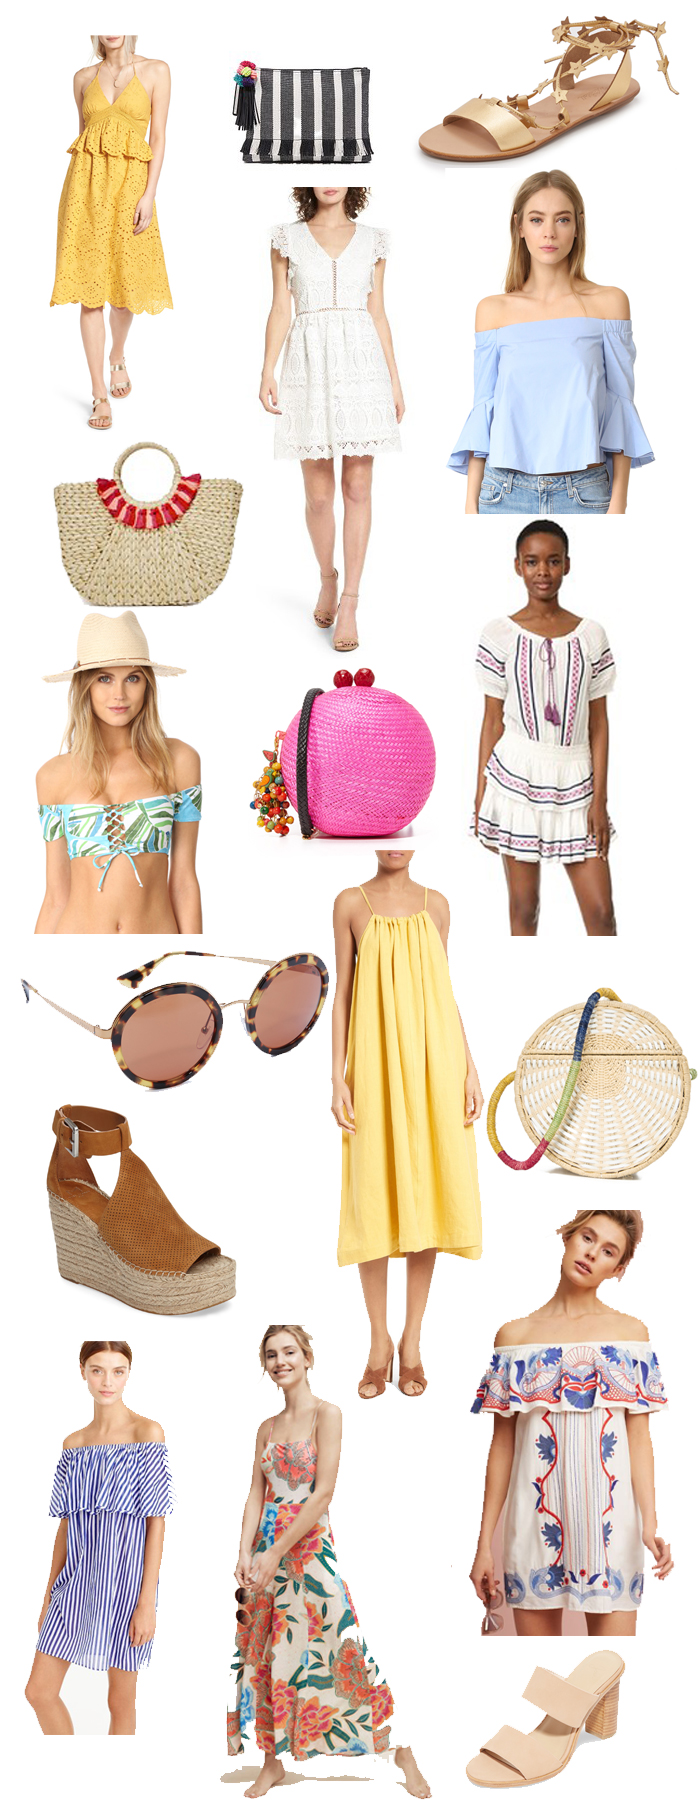 spring finds vacation destination, vacation wear 2017, spring break outfits 2017, spring outfits, beach outfits for spring 2017, beach coverup, shop bop,